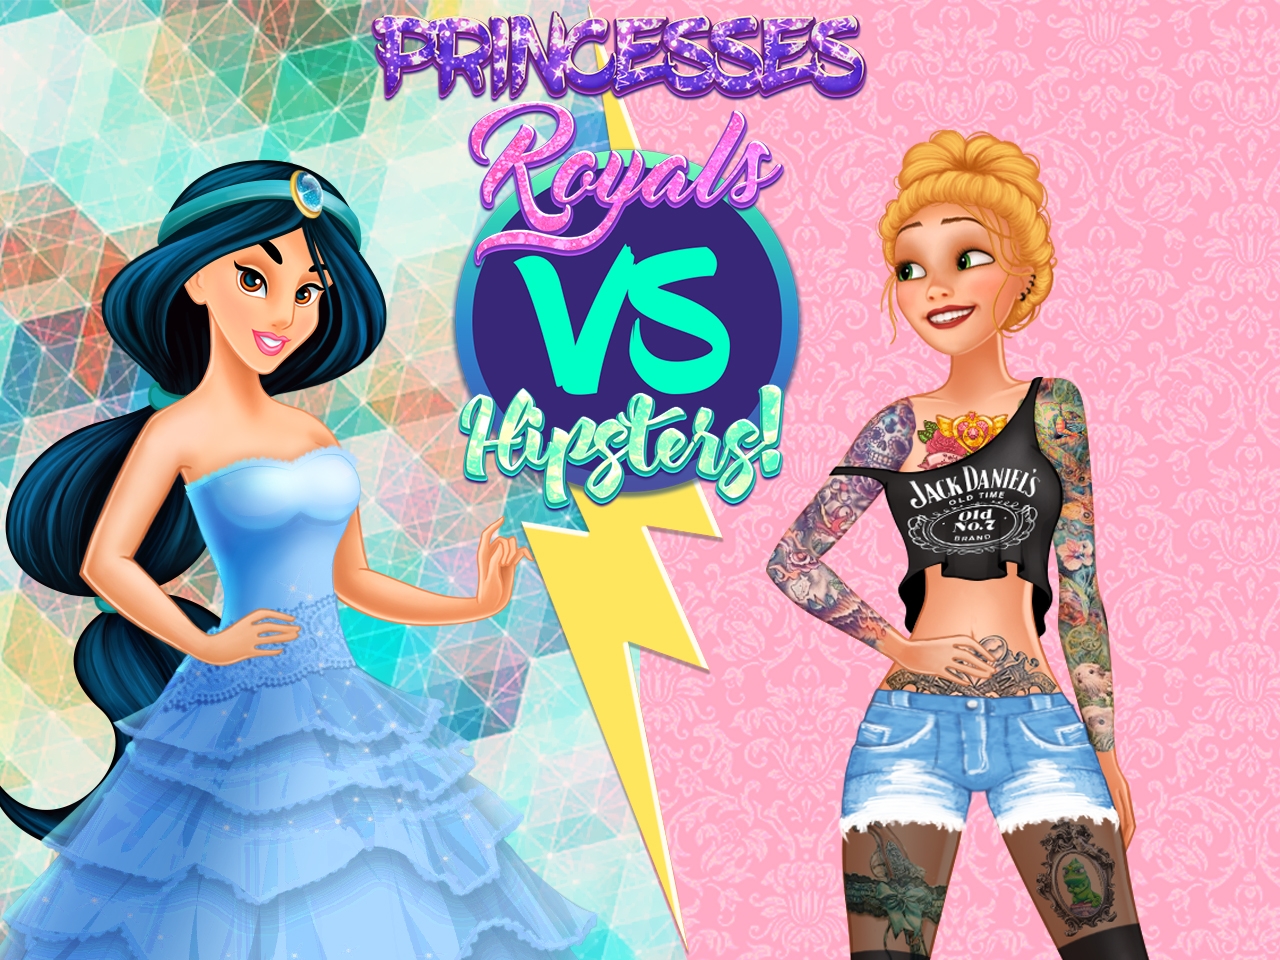 Royals vs Hipsters